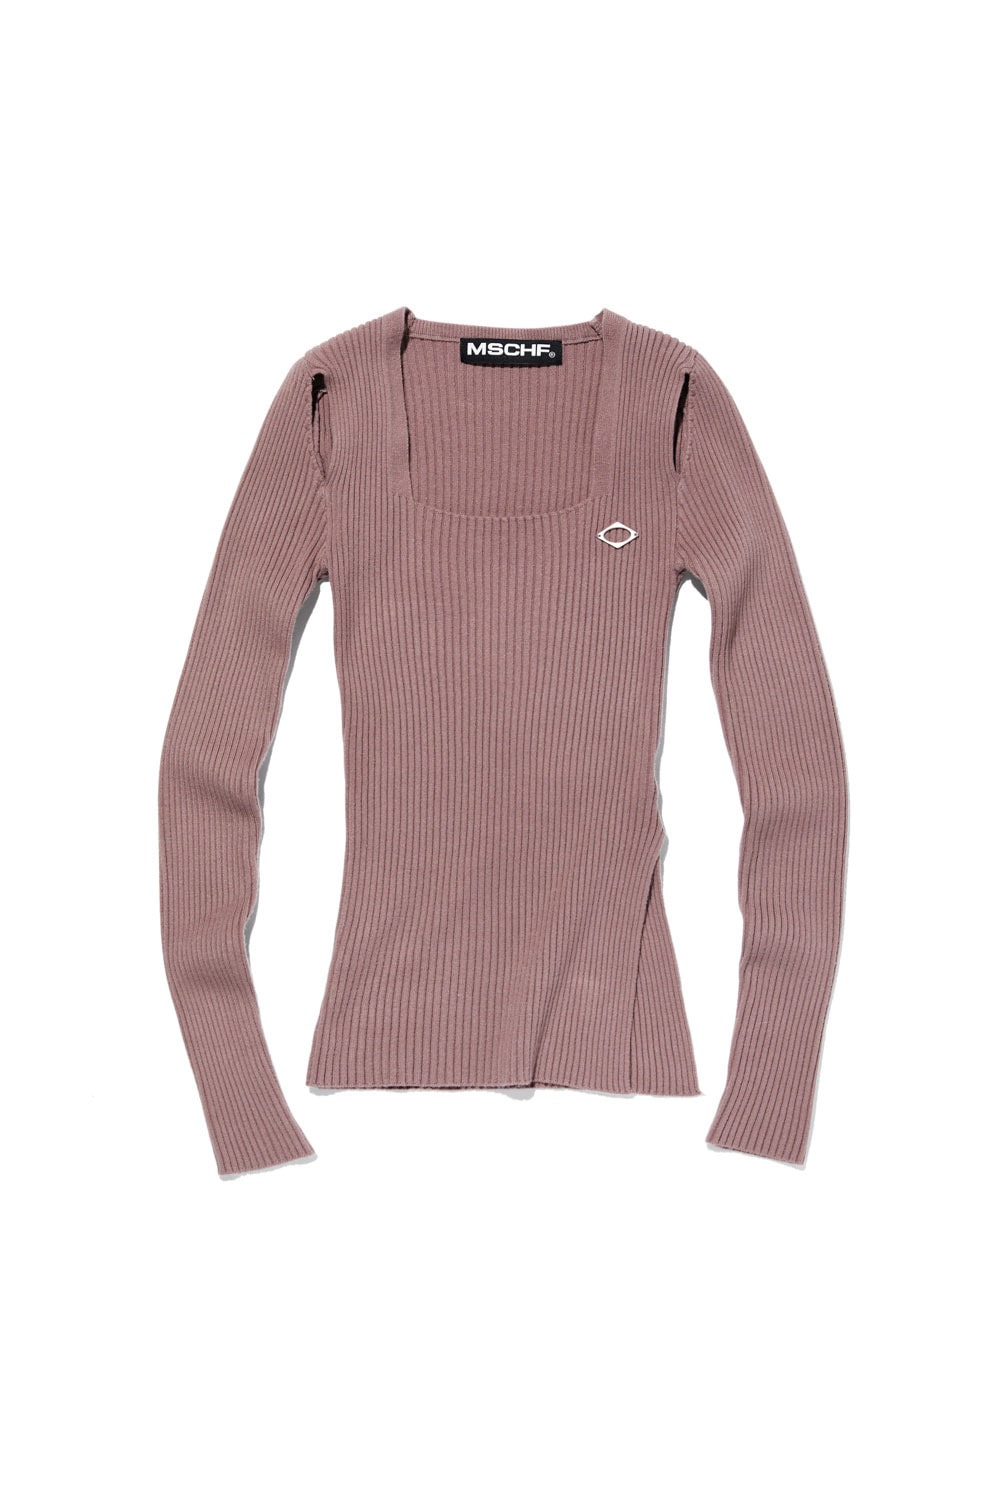 SQUARE NECK KNITTED TOP_ROSE BROWN